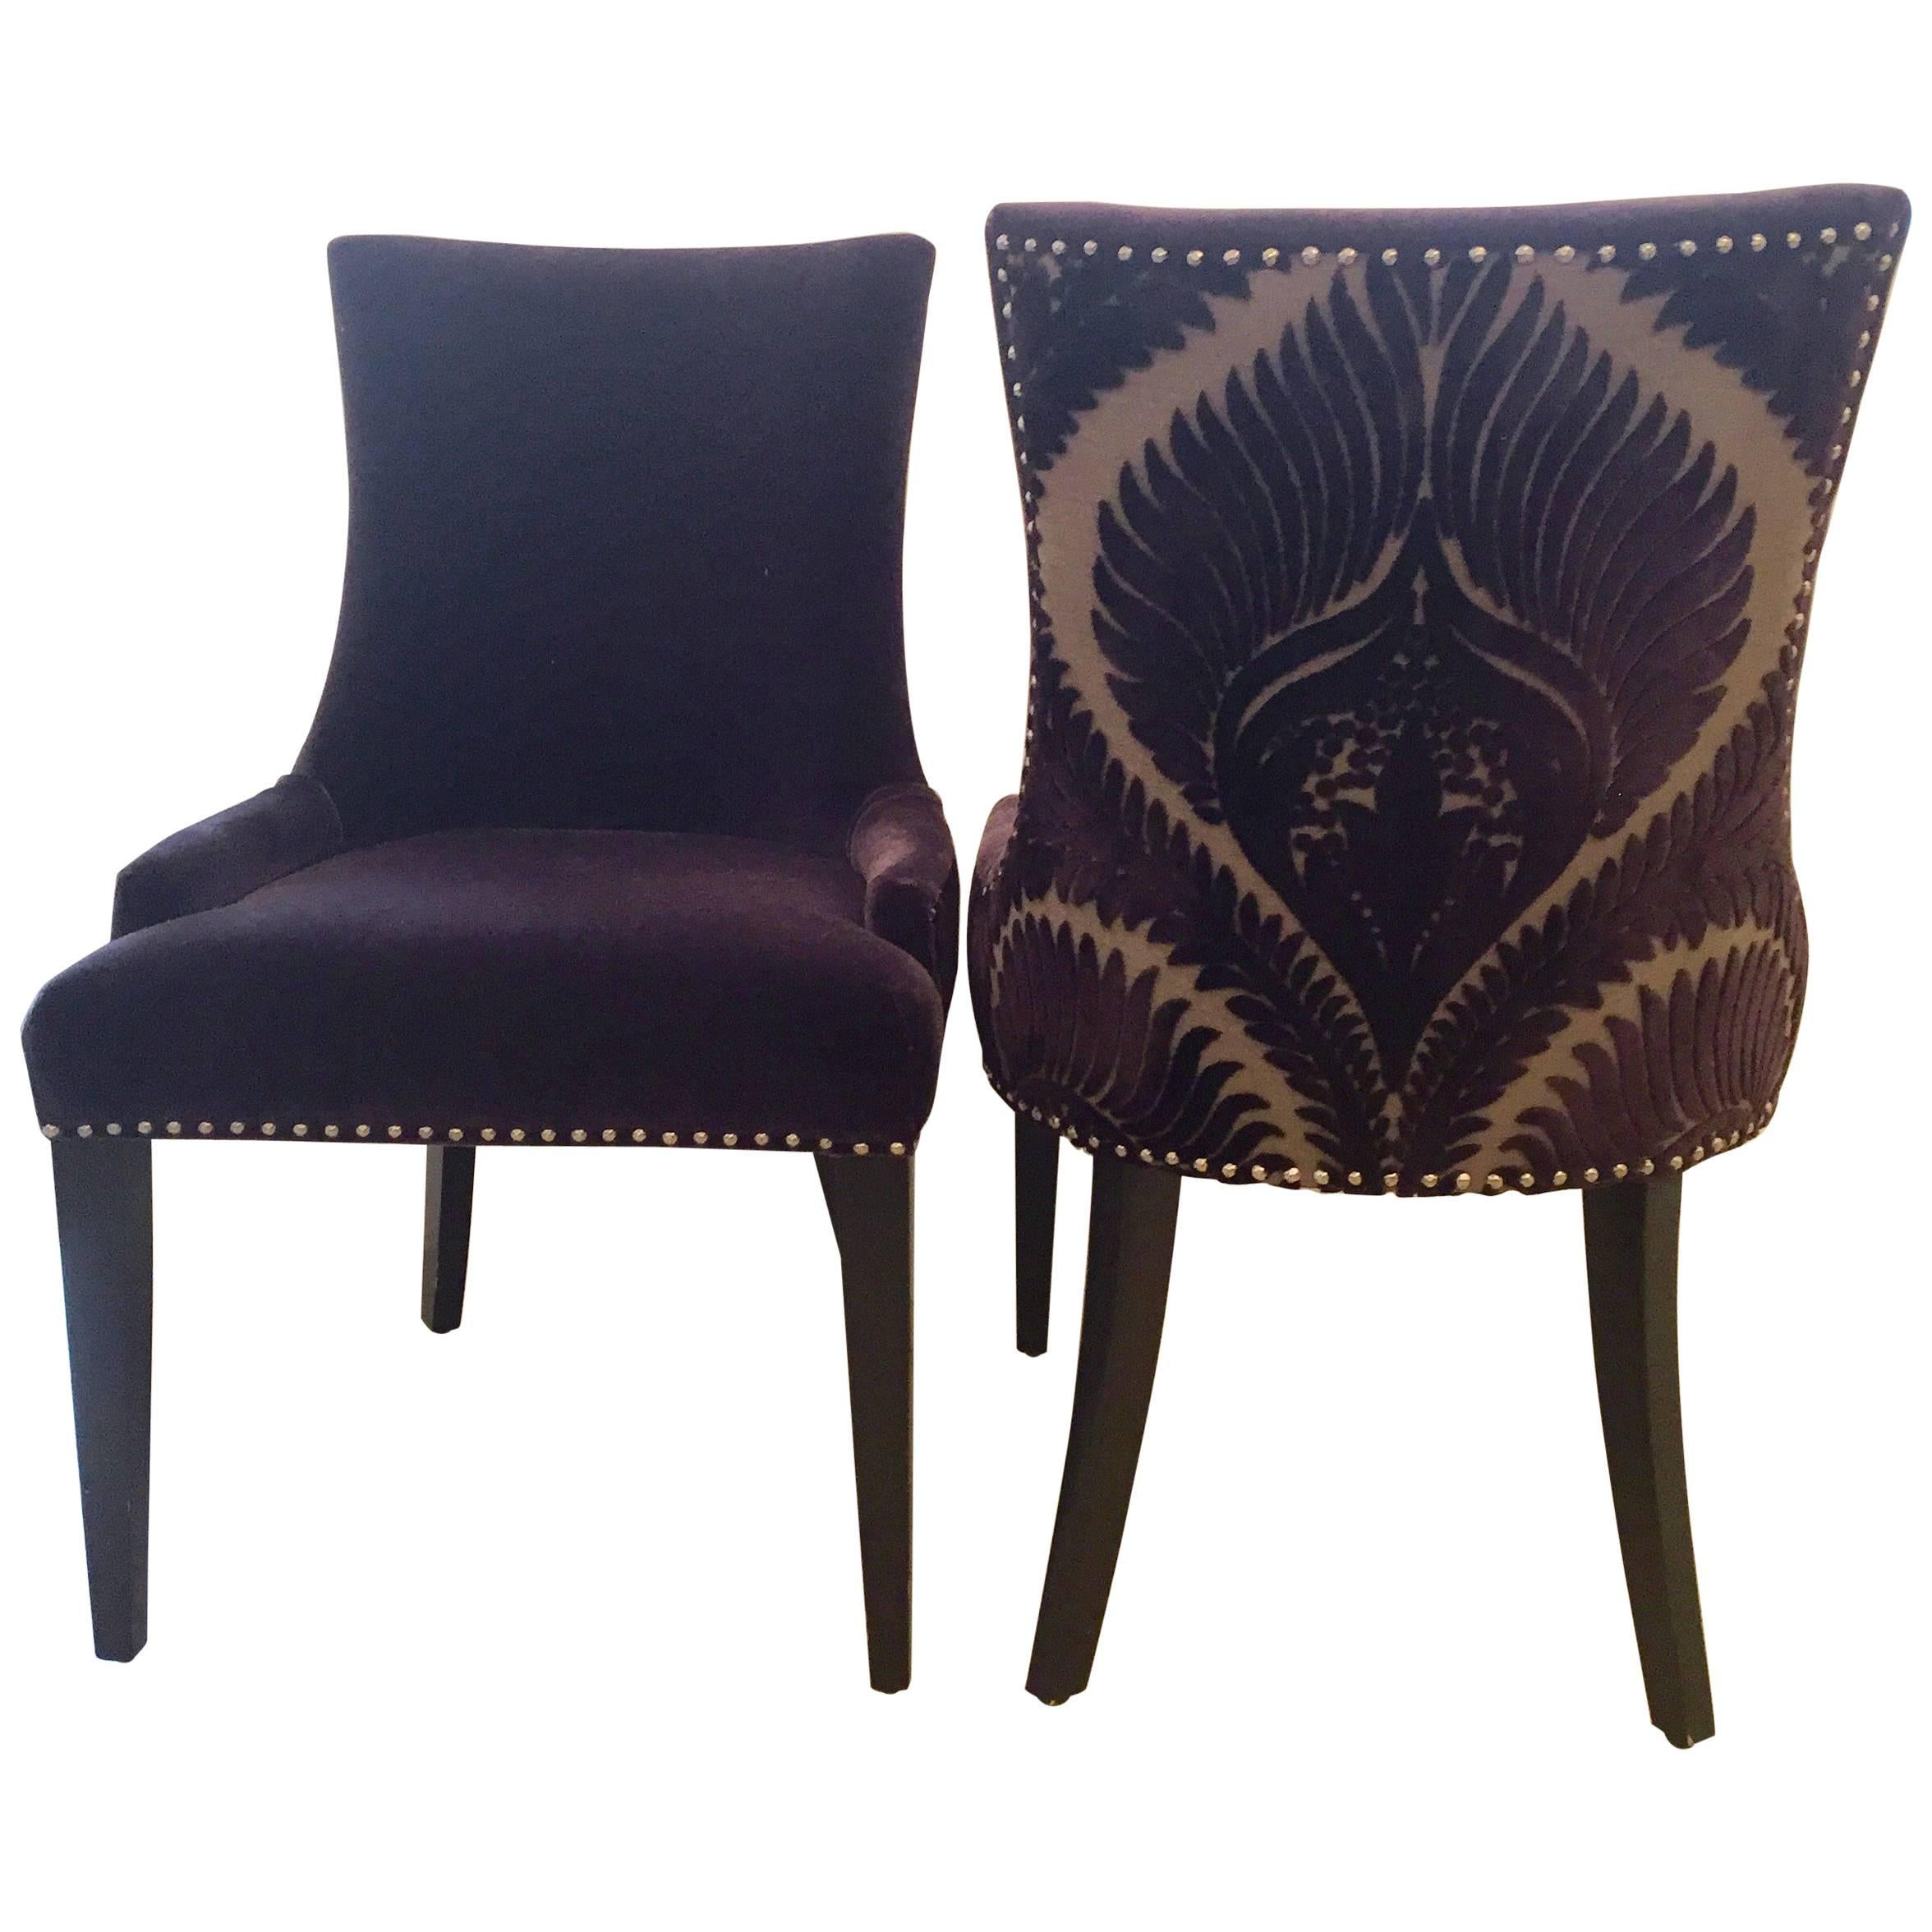 Super Chic Pair of Purple Mohair and Cut Velvet Dining or Livingroom Chairs